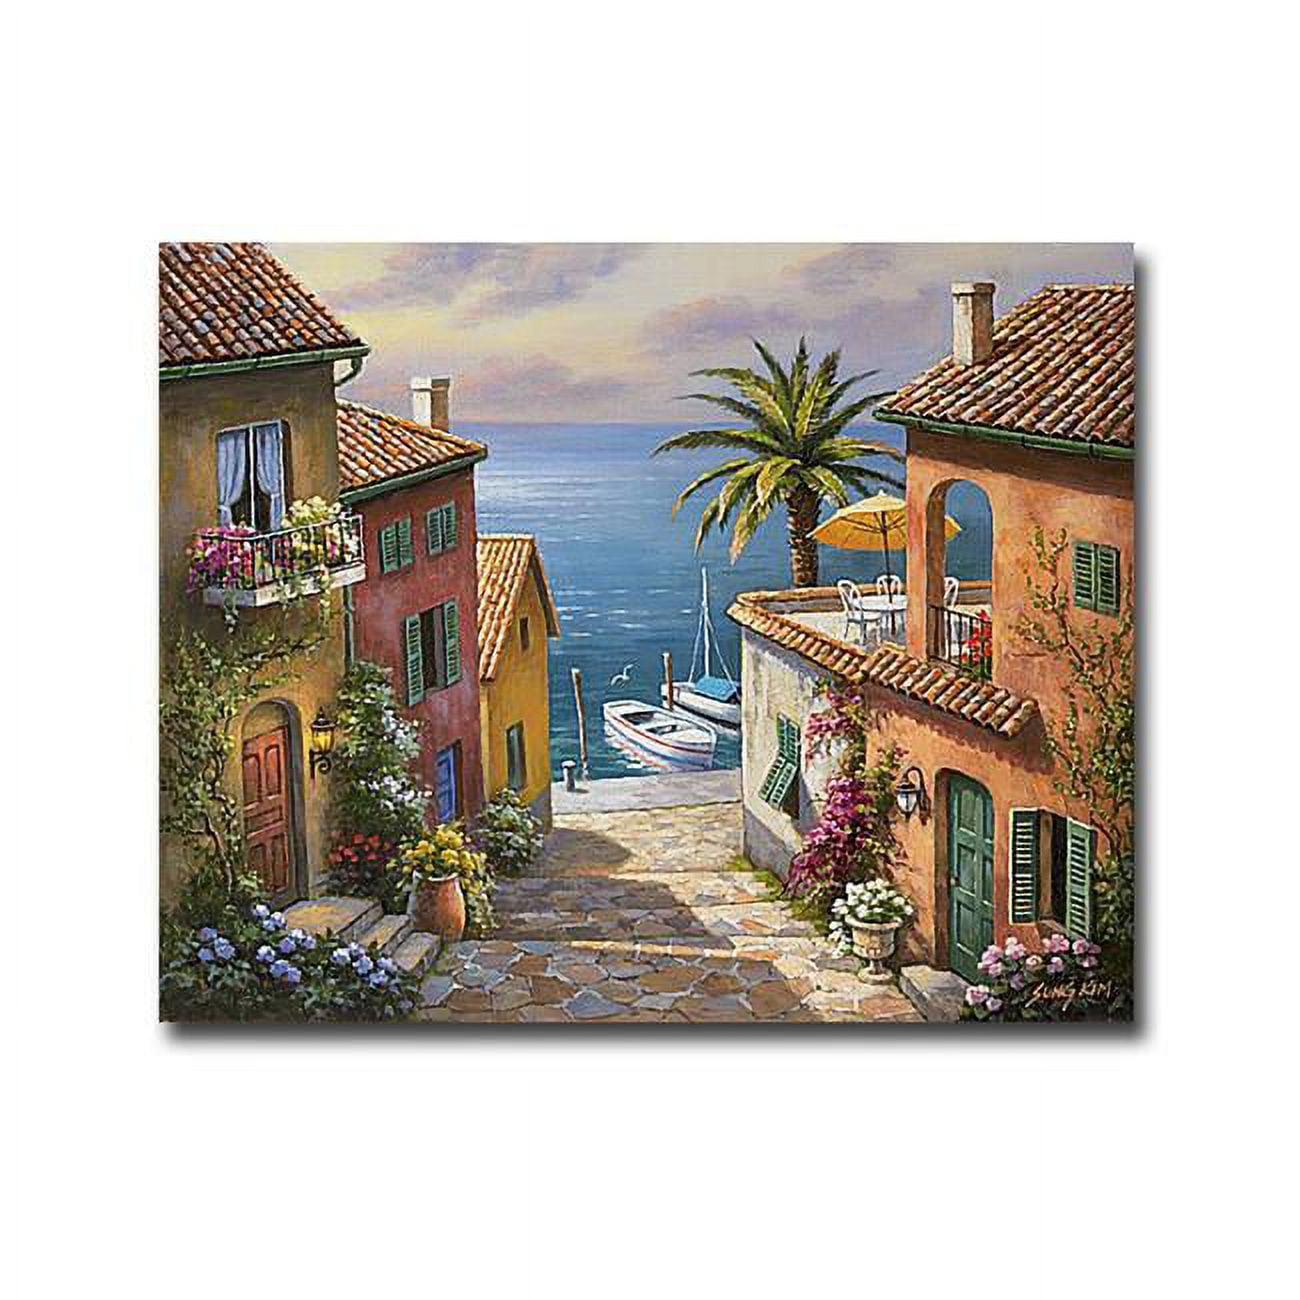 1215675ig The Villas Private Dock By Sung Kim Premium Gallery-wrapped Canvas Giclee Art - 12 X 15 In.